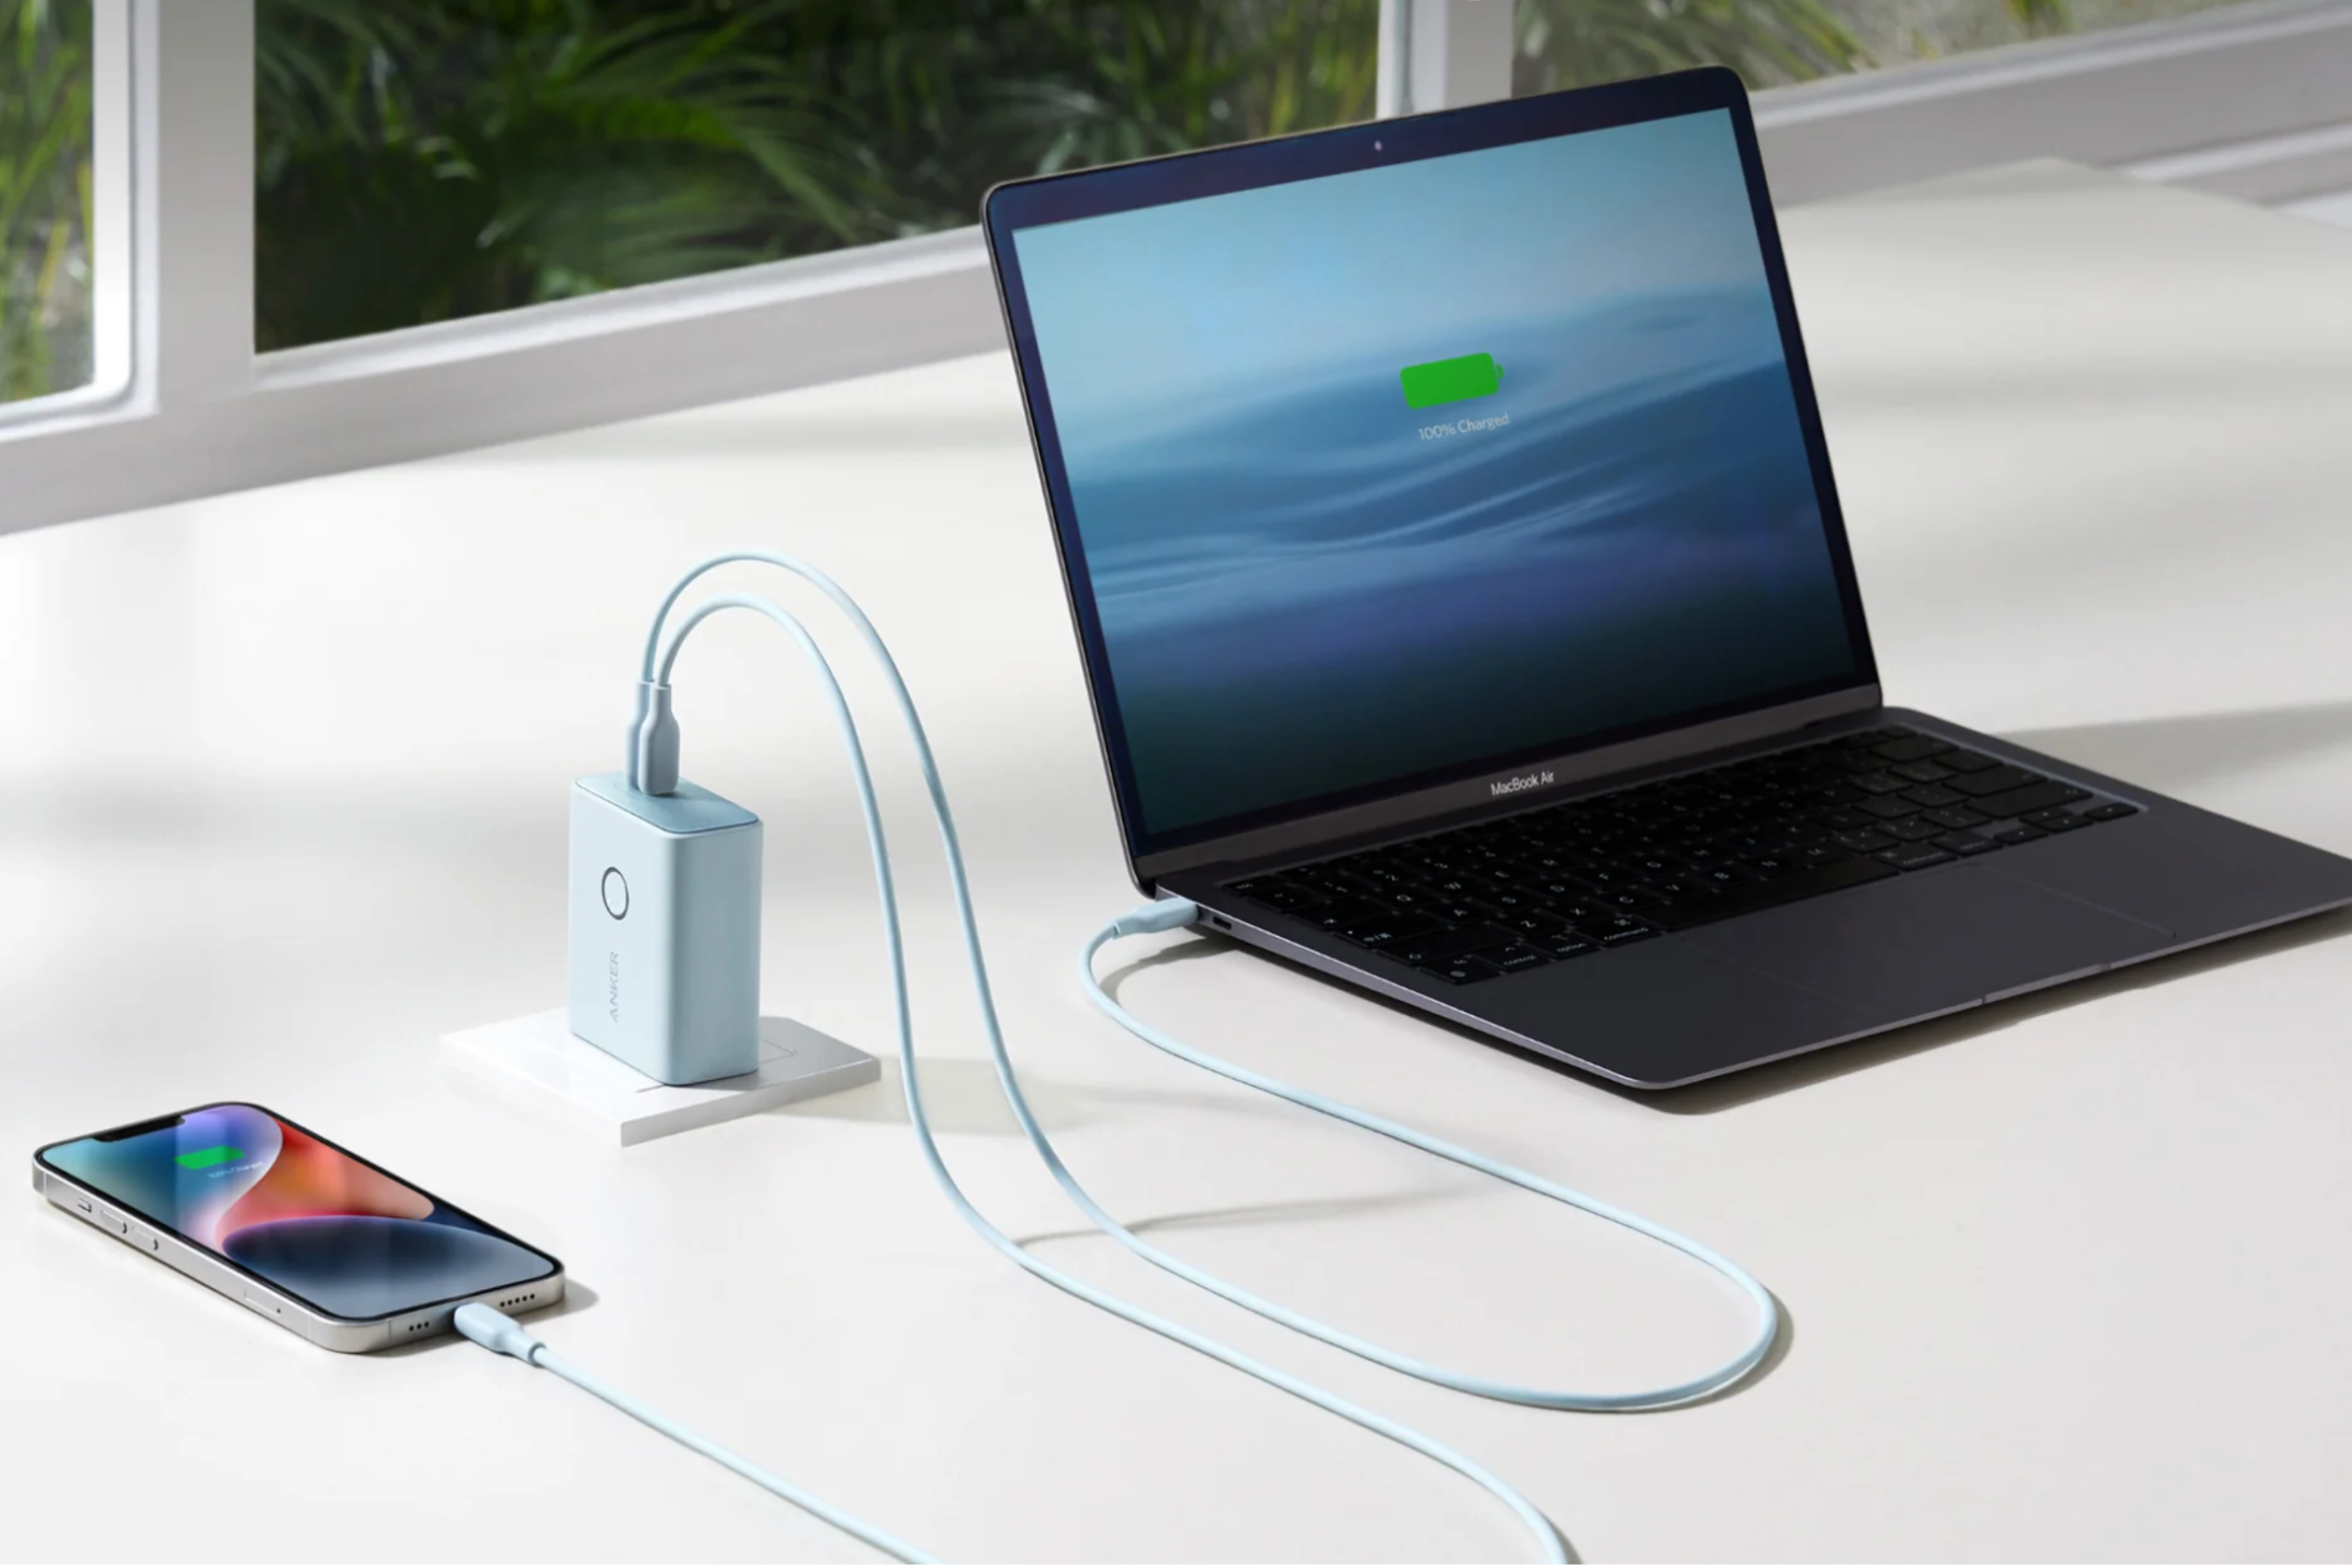  Laptop and smartphone on desk charging with Anker 521 Power Bank charger 